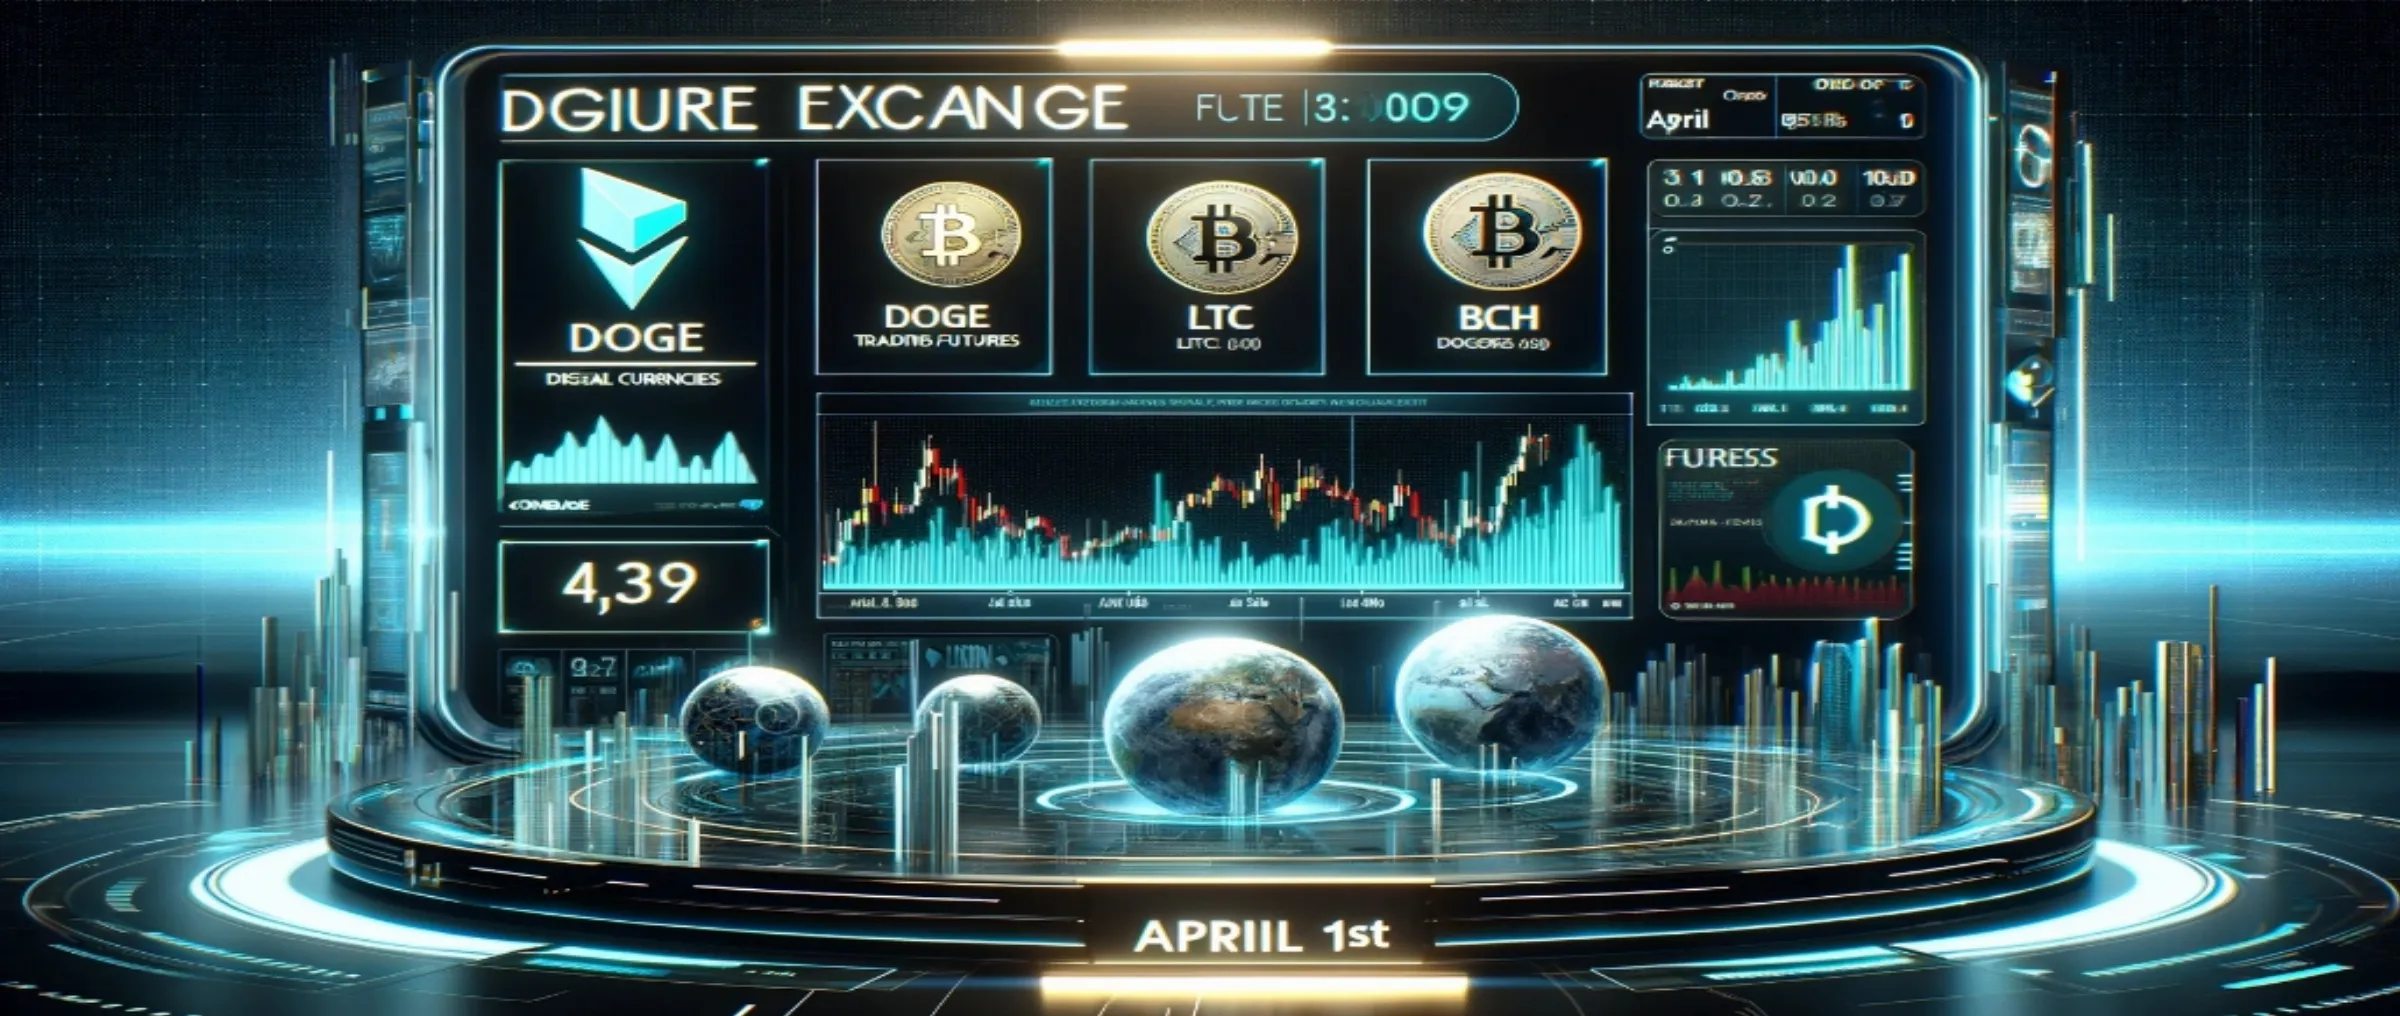 On April 1, Coinbase will launch futures for DOGE, LTC and BCH